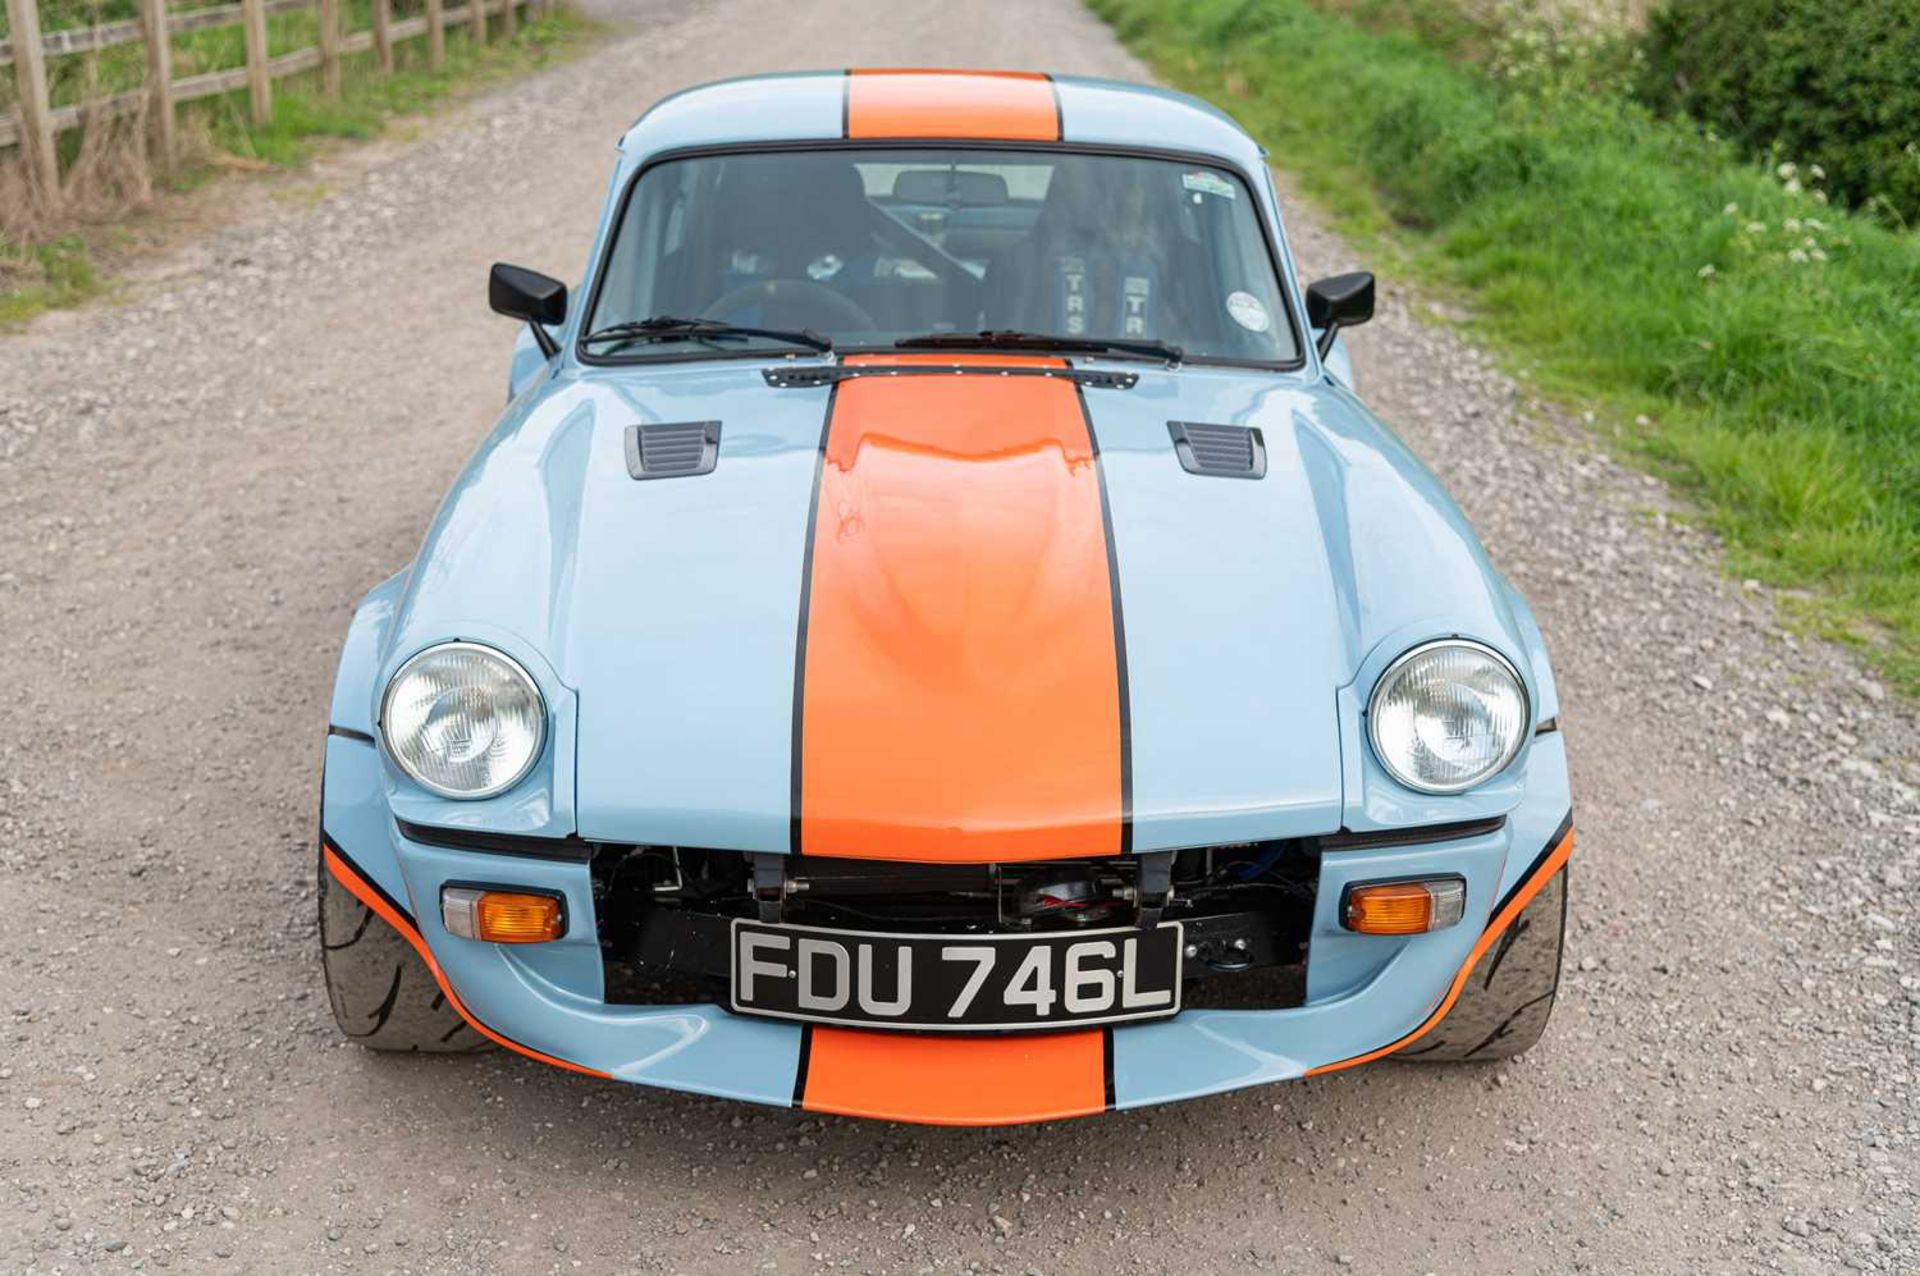 1973 Triumph GT6  ***NO RESERVE*** Presented in Gulf Racing-inspired paintwork, road-going track wea - Image 2 of 65